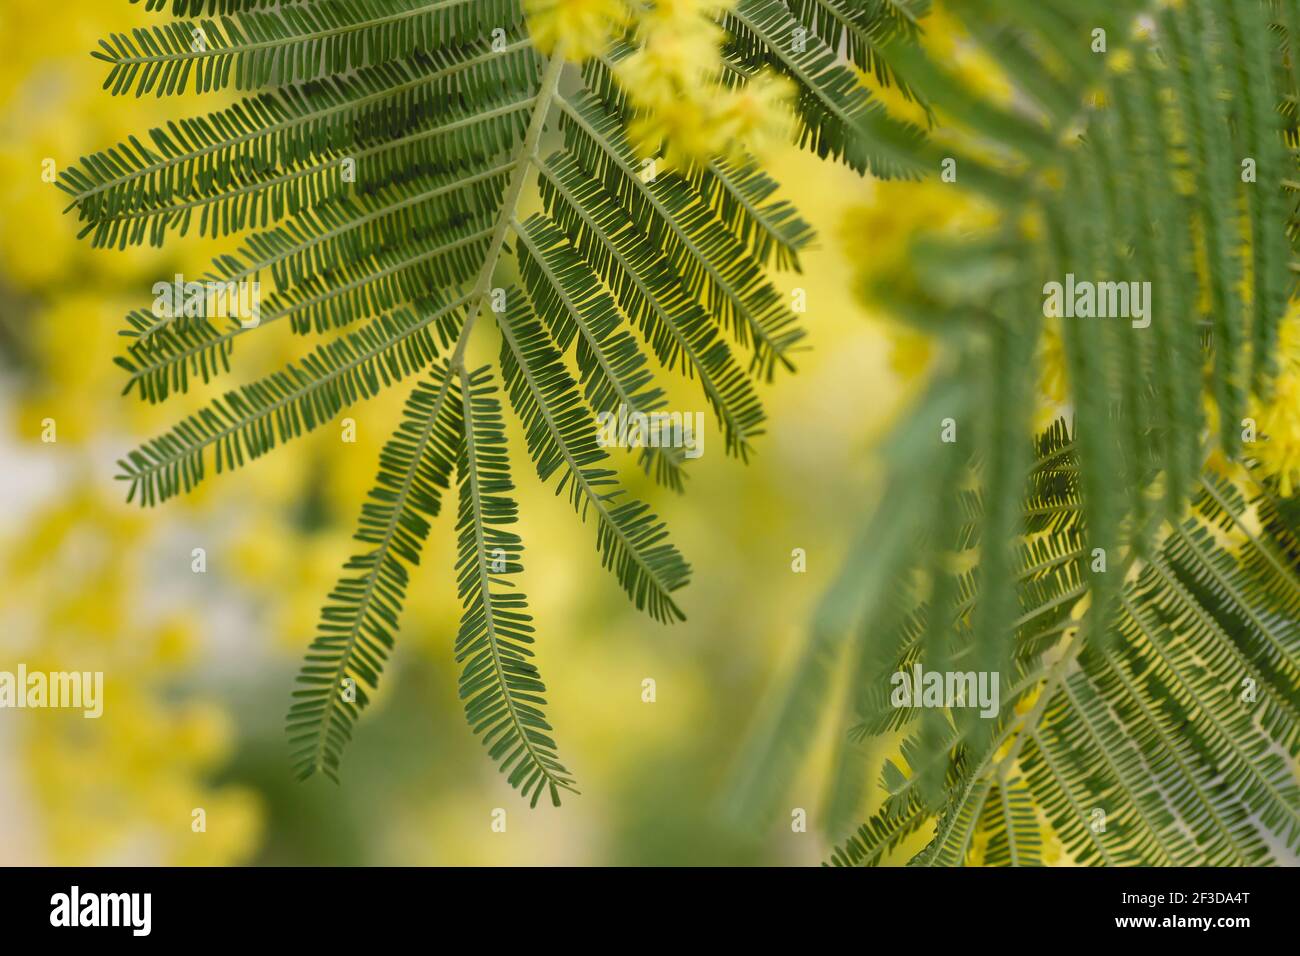 Blossoming silver wattle green leaves and yellow flowers close up Stock Photo